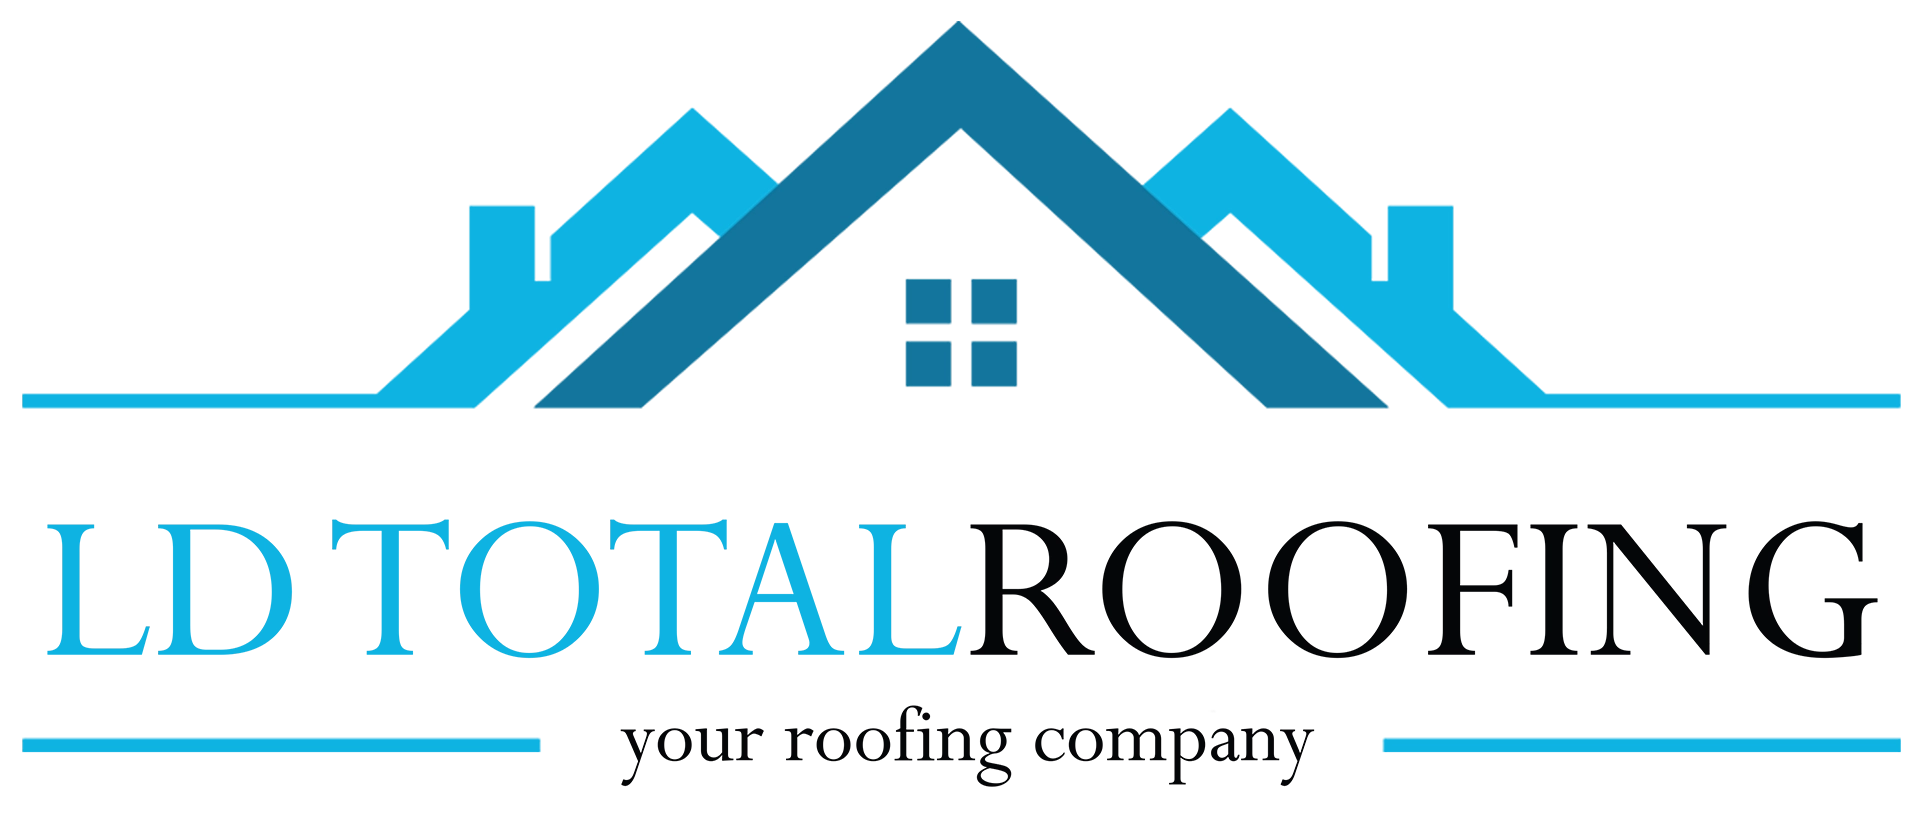 LD Total Roofing Company is a Top Rated Sarasota/Bradenton Roofing Company